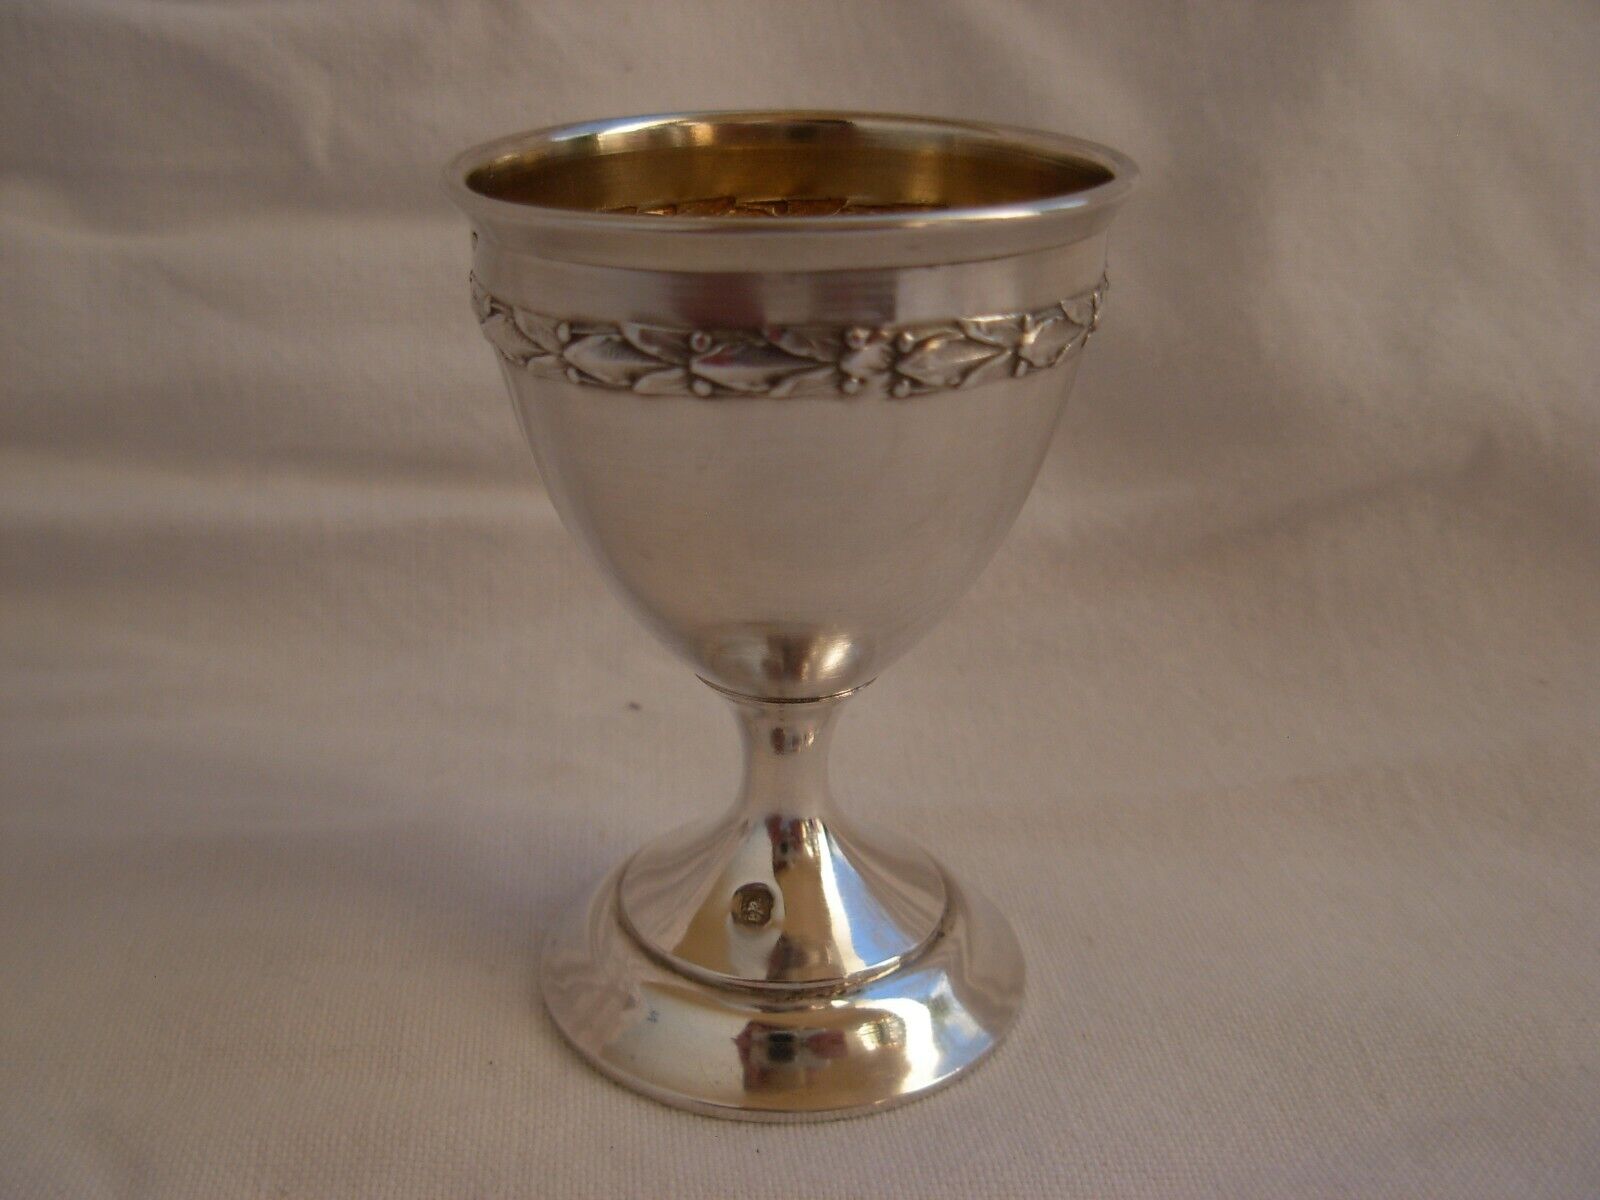  ANTIQUE FRENCH STERLING SILVER EGG CUP,EARLY 20th CENTURY.